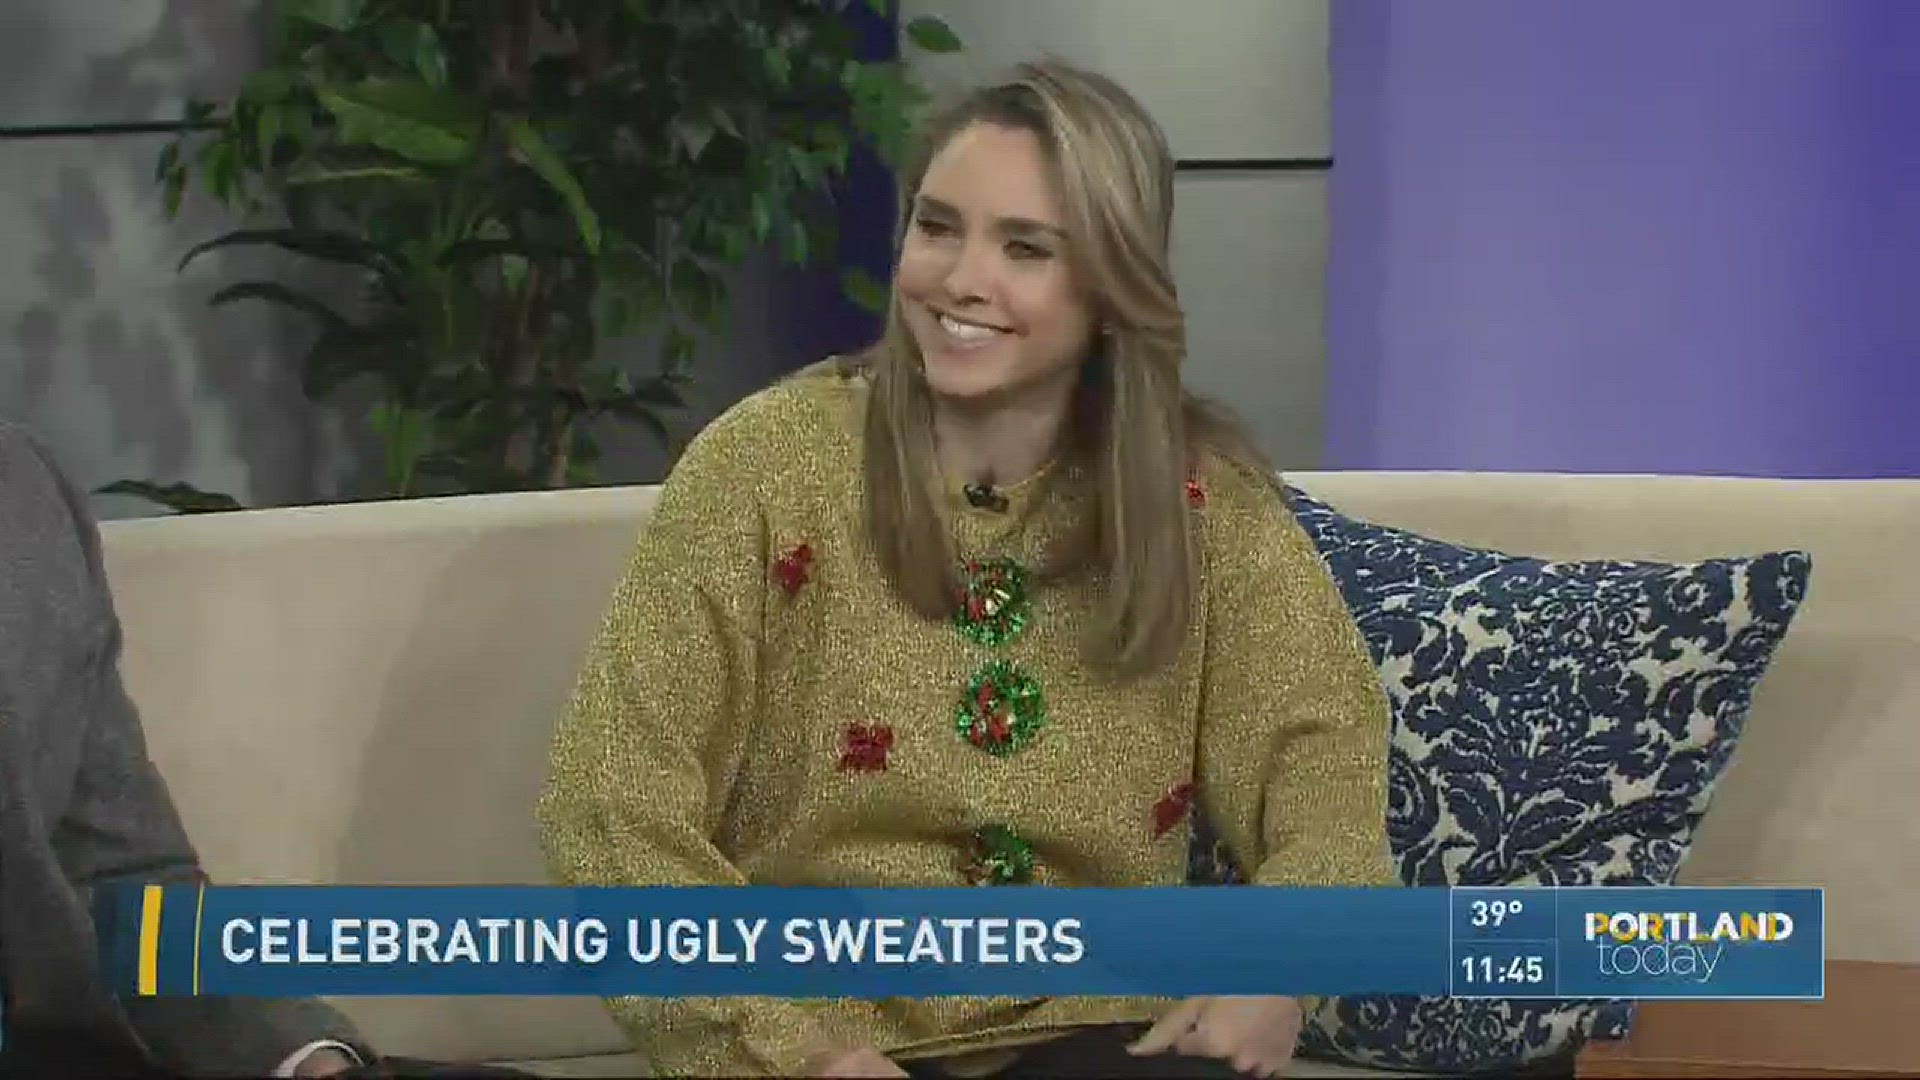 Portland Today's ugly sweater challenge